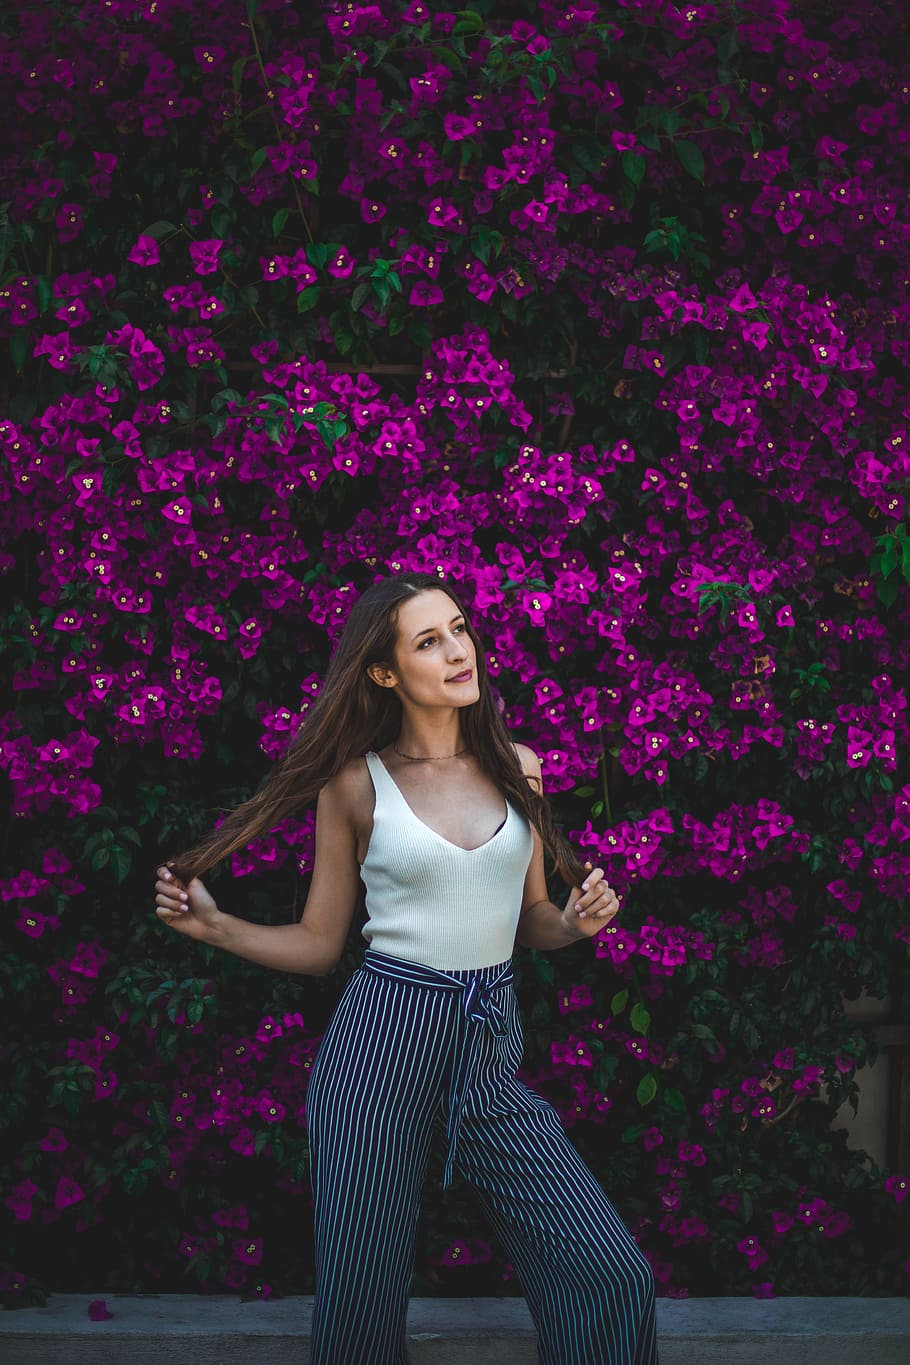 smiling woman holding her hair in front of purple flowers during daytime, HD wallpaper